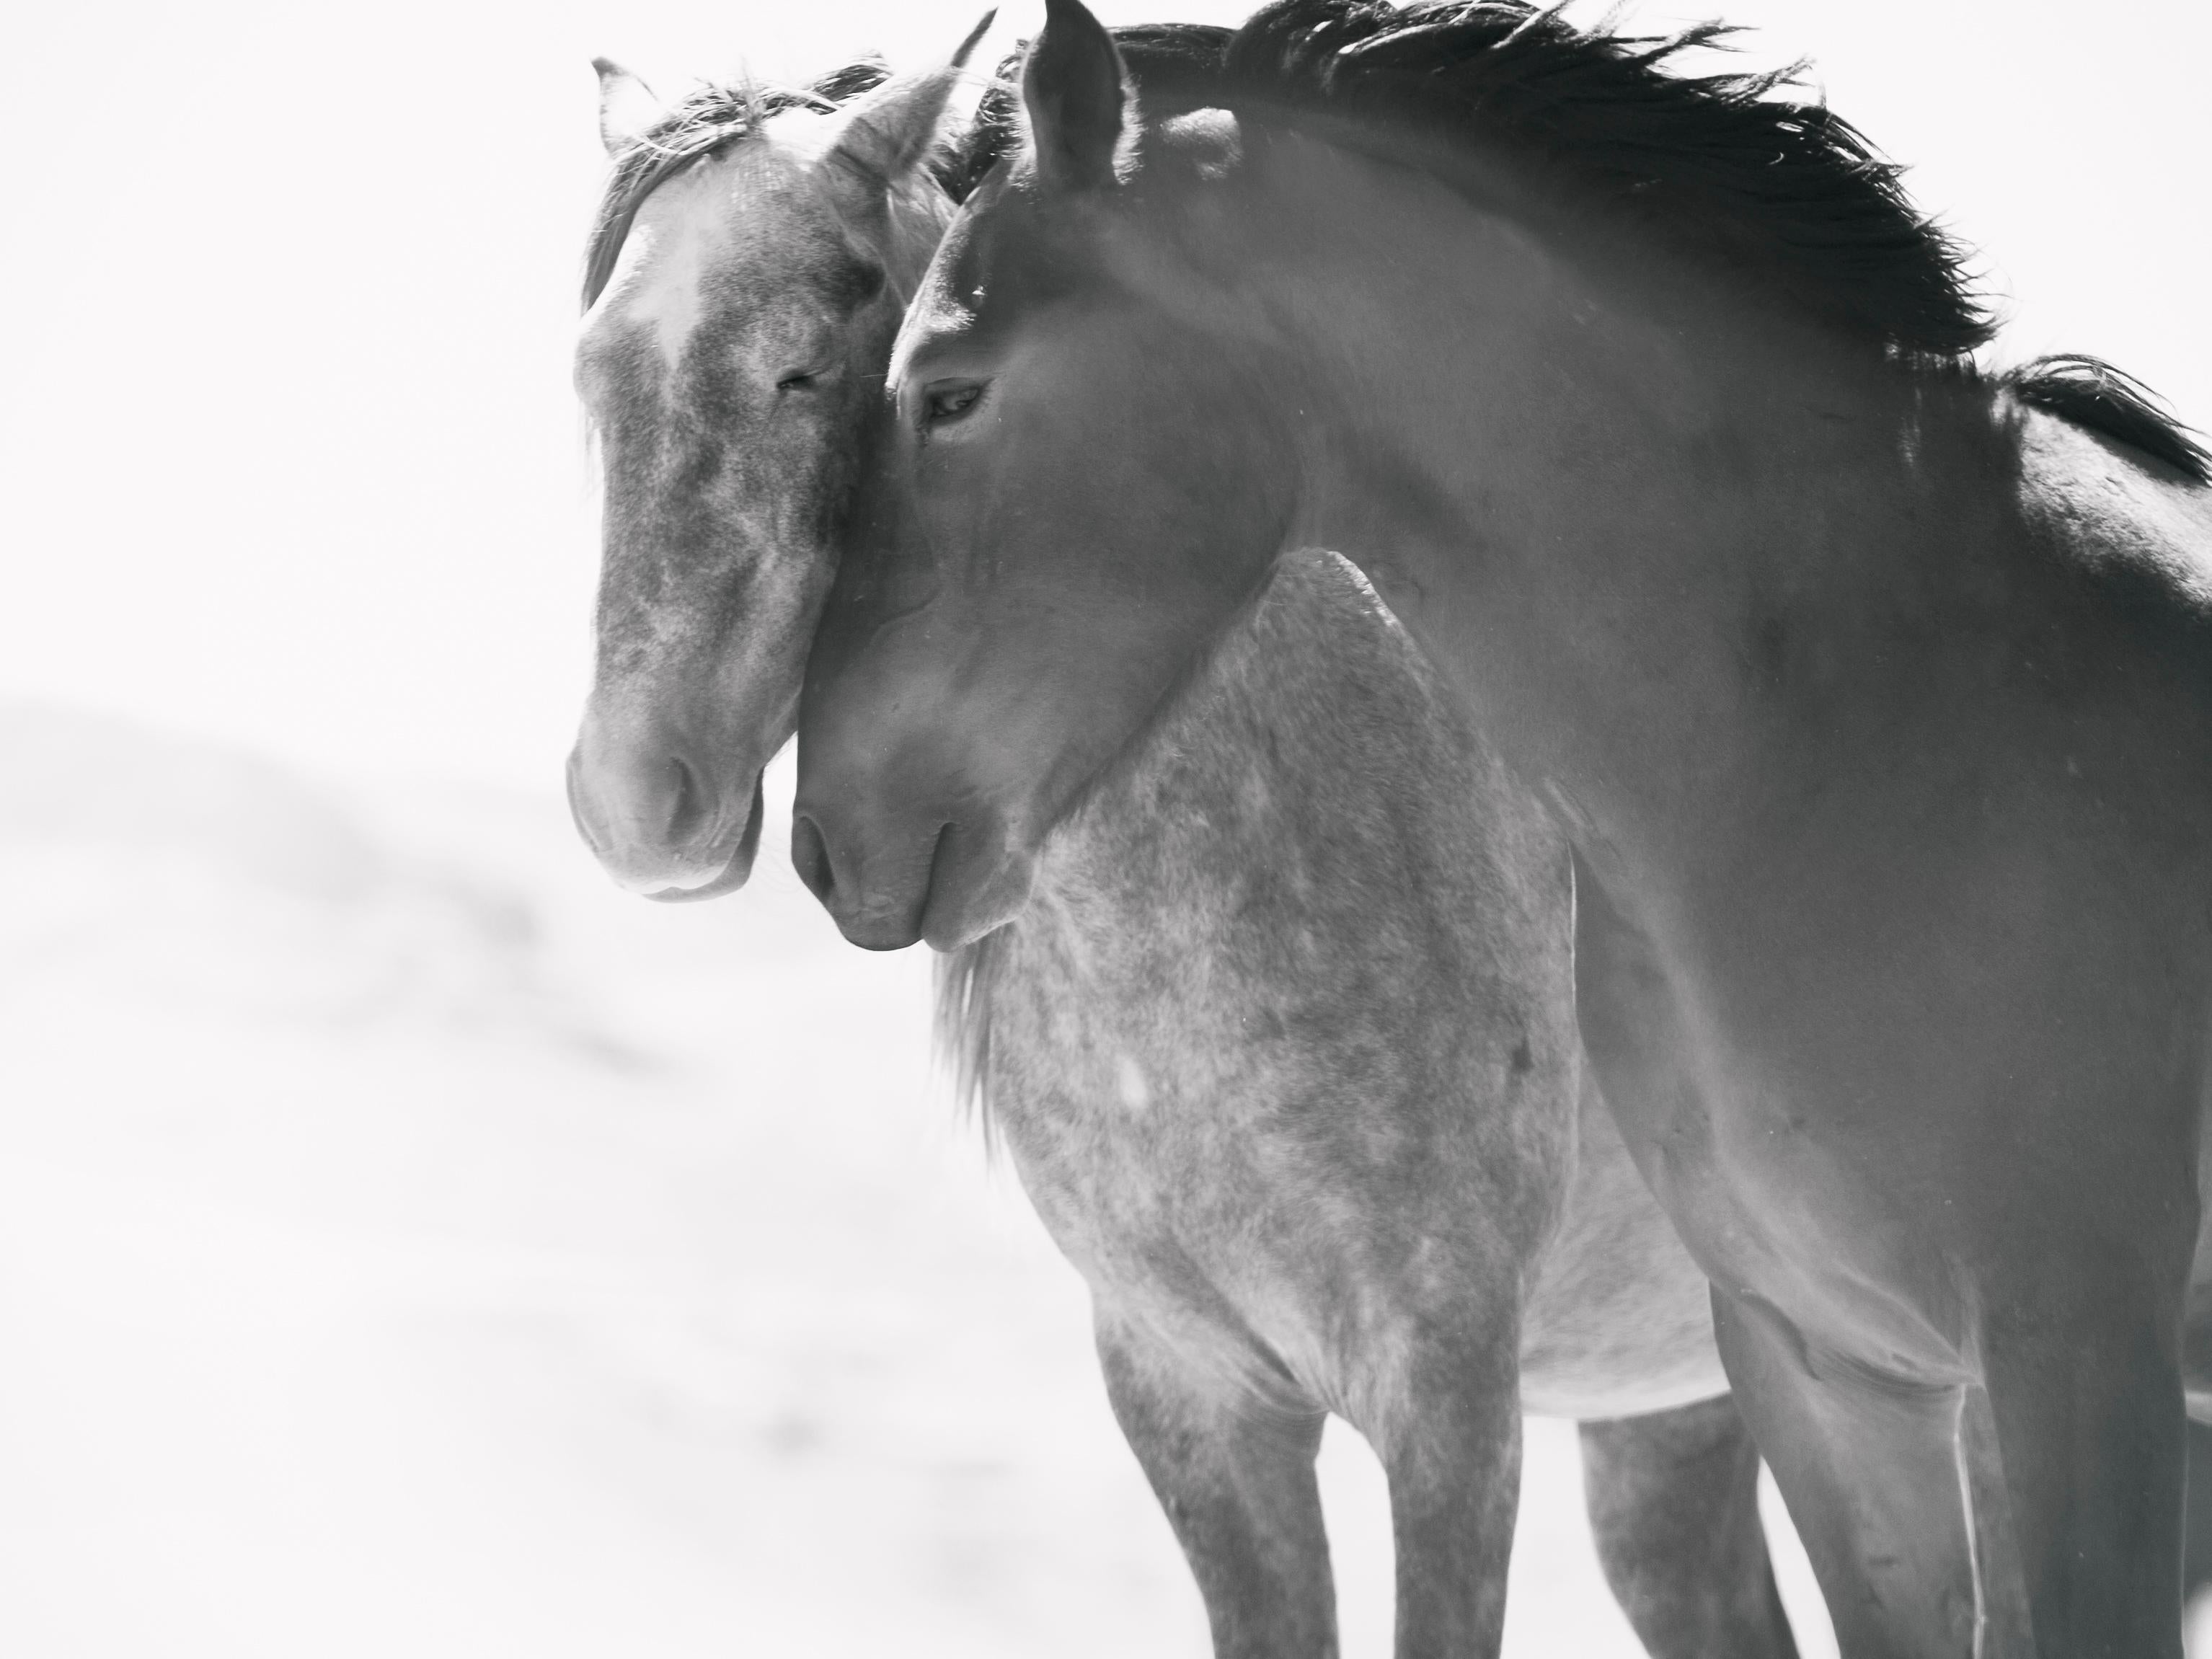 Shane Russeck Animal Print - Black and White Photography  Wild Horses Mustangs Photograph "Soulmates" 30x40 